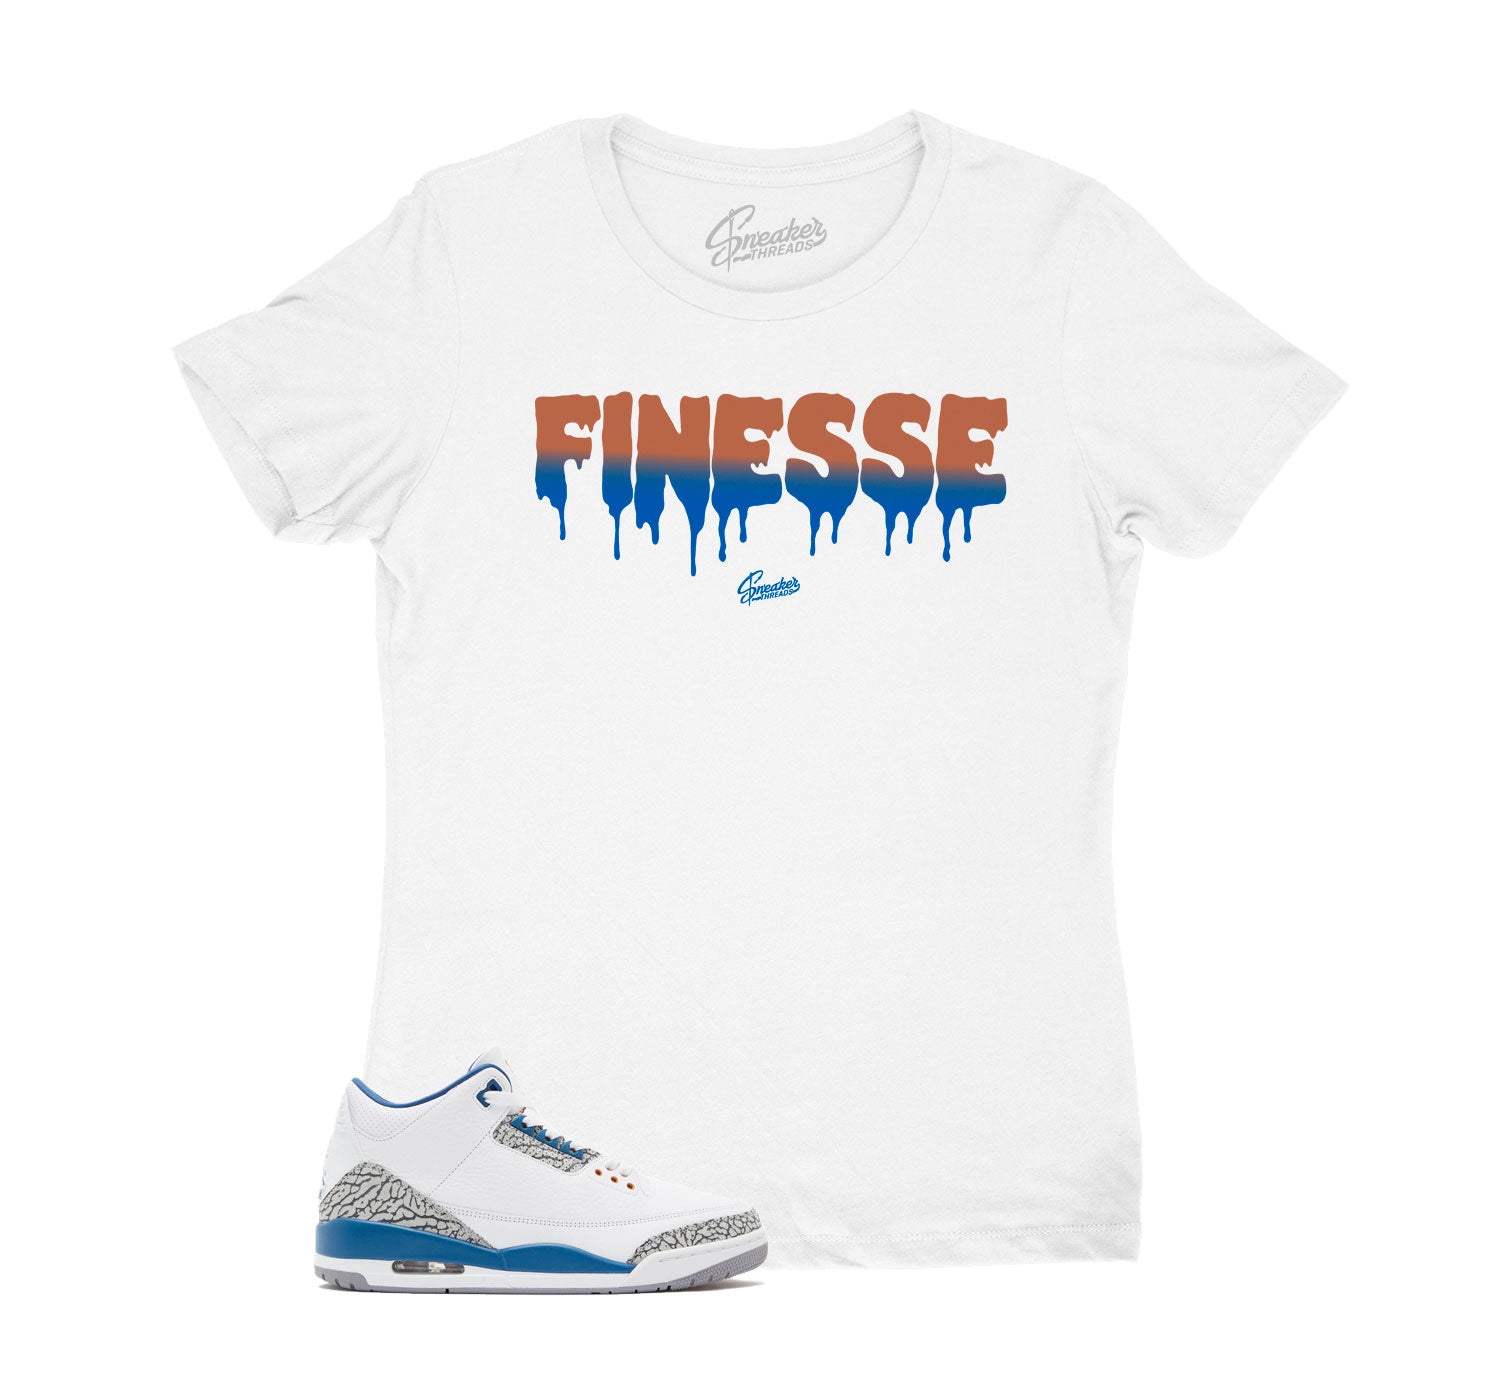 Womens Wizards 3 Shirt - Finesse - White